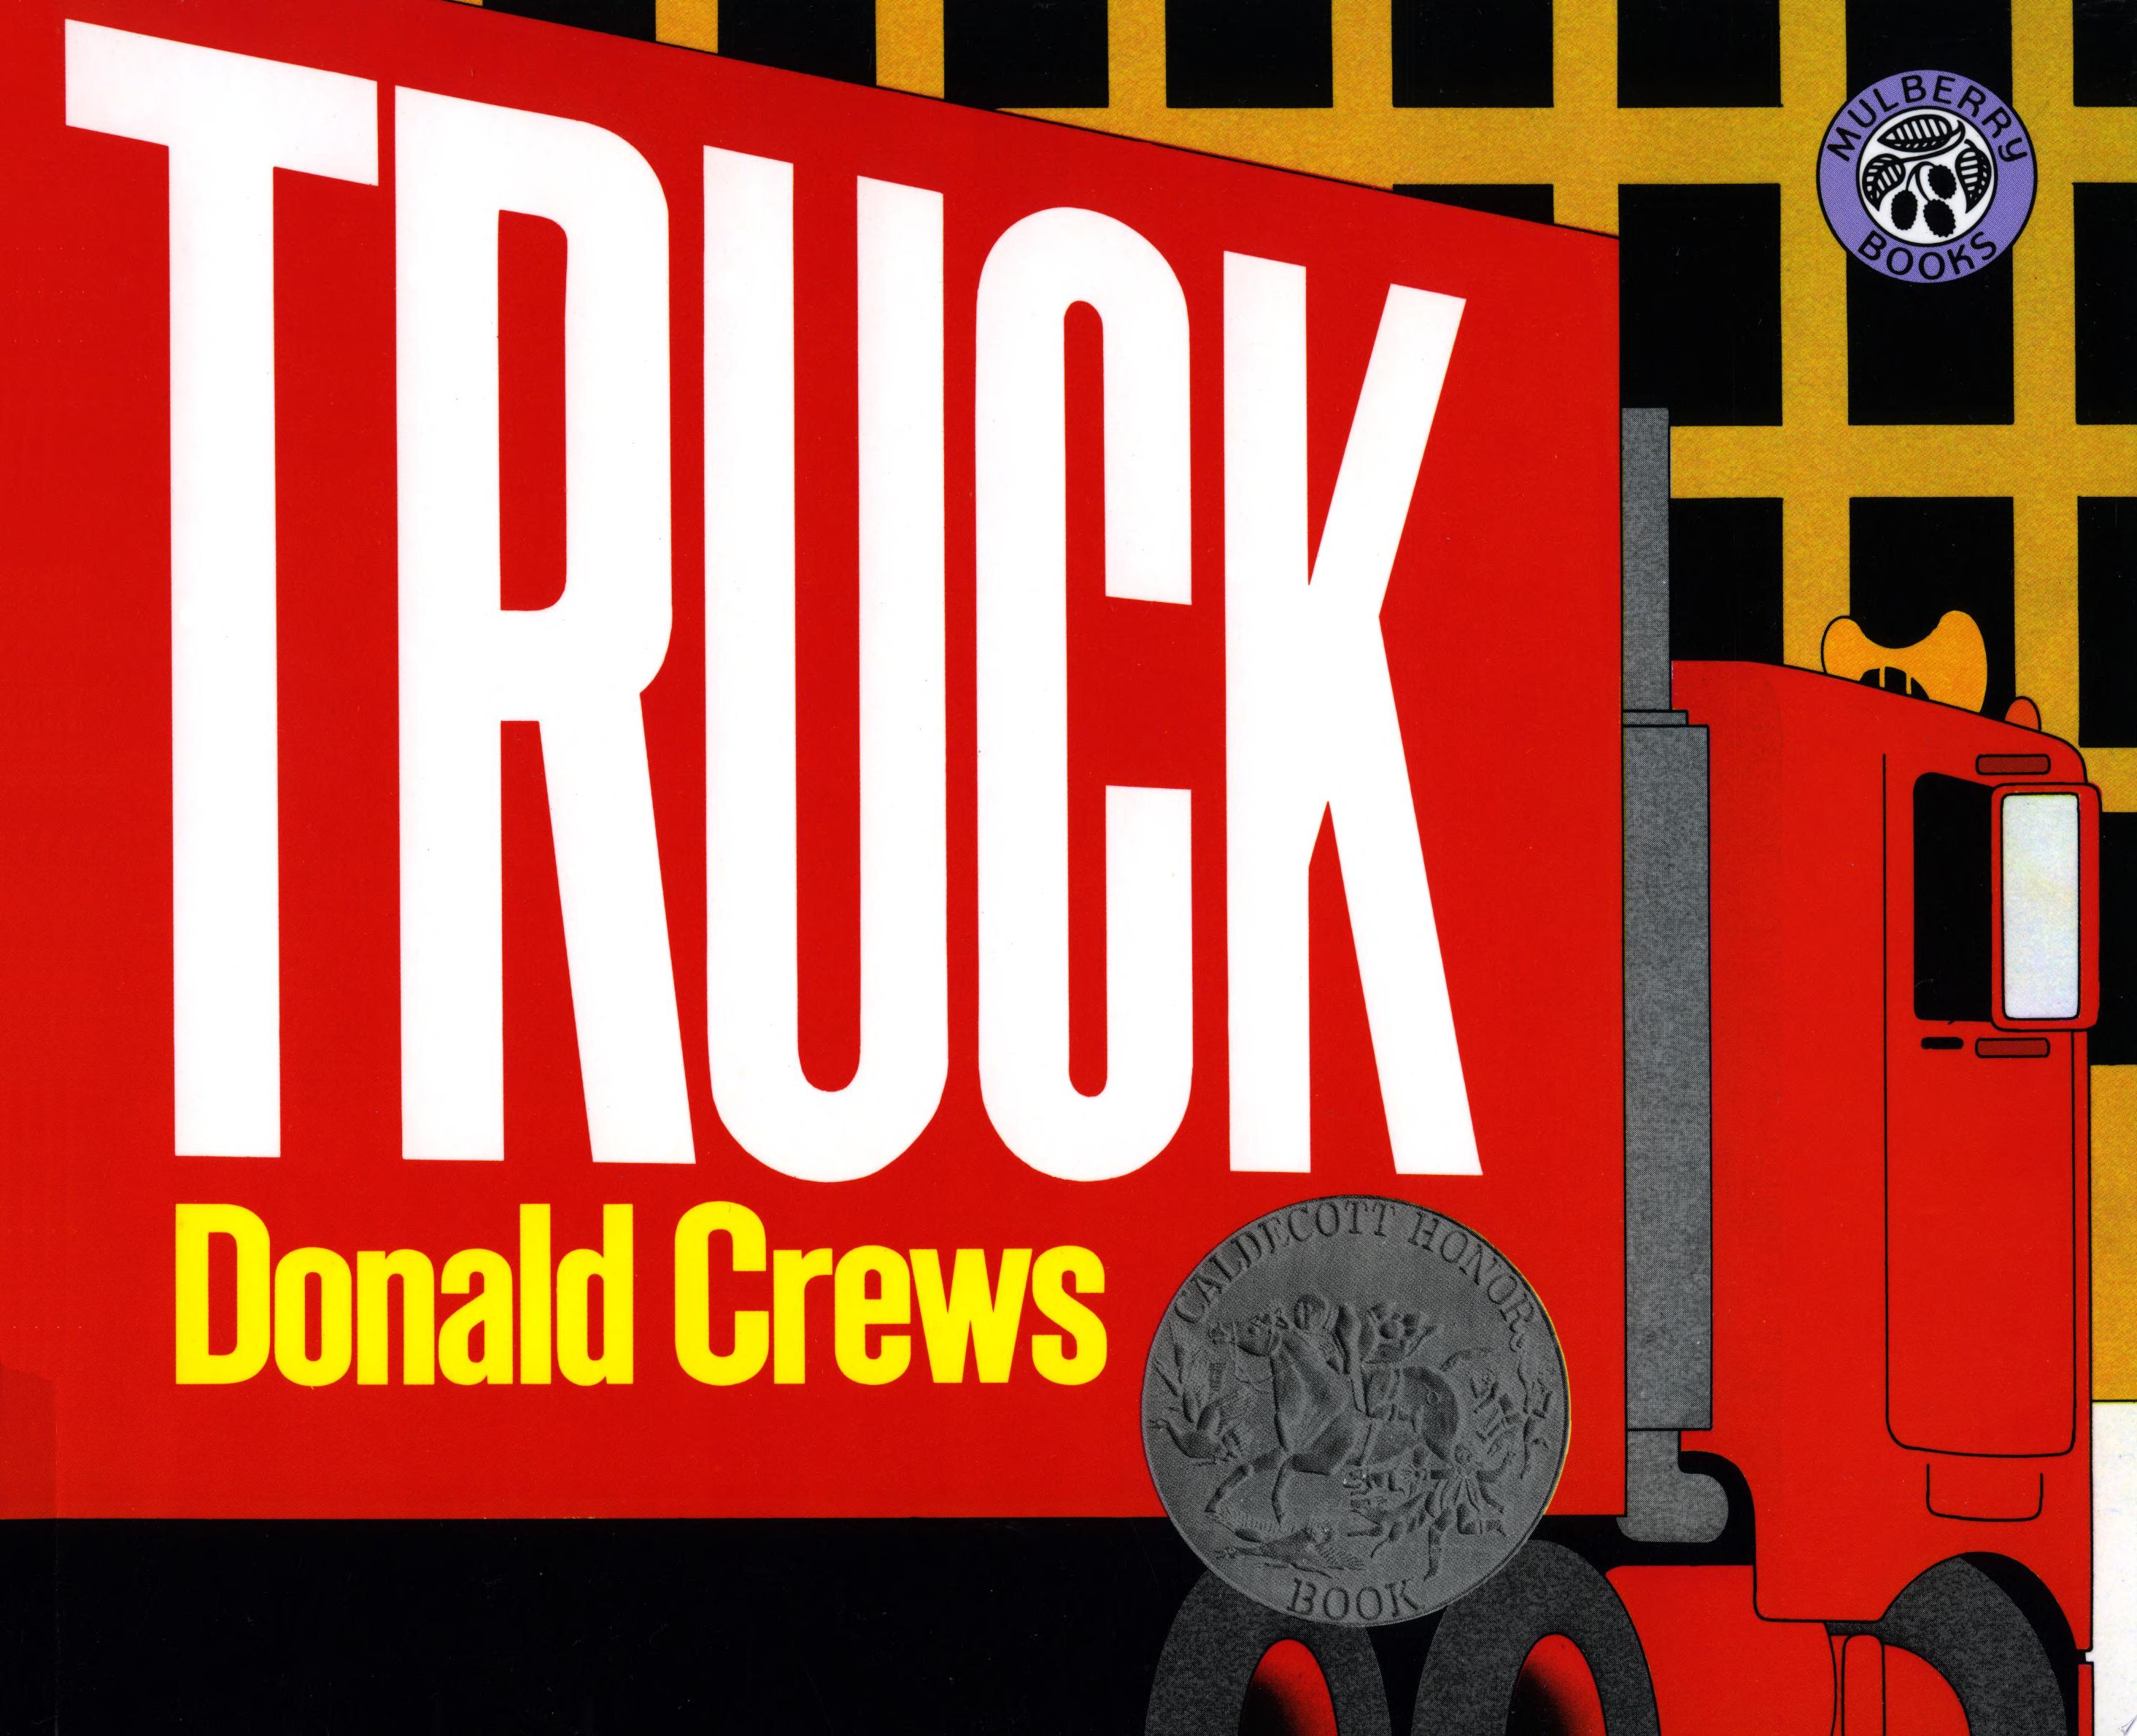 Image for "Truck"